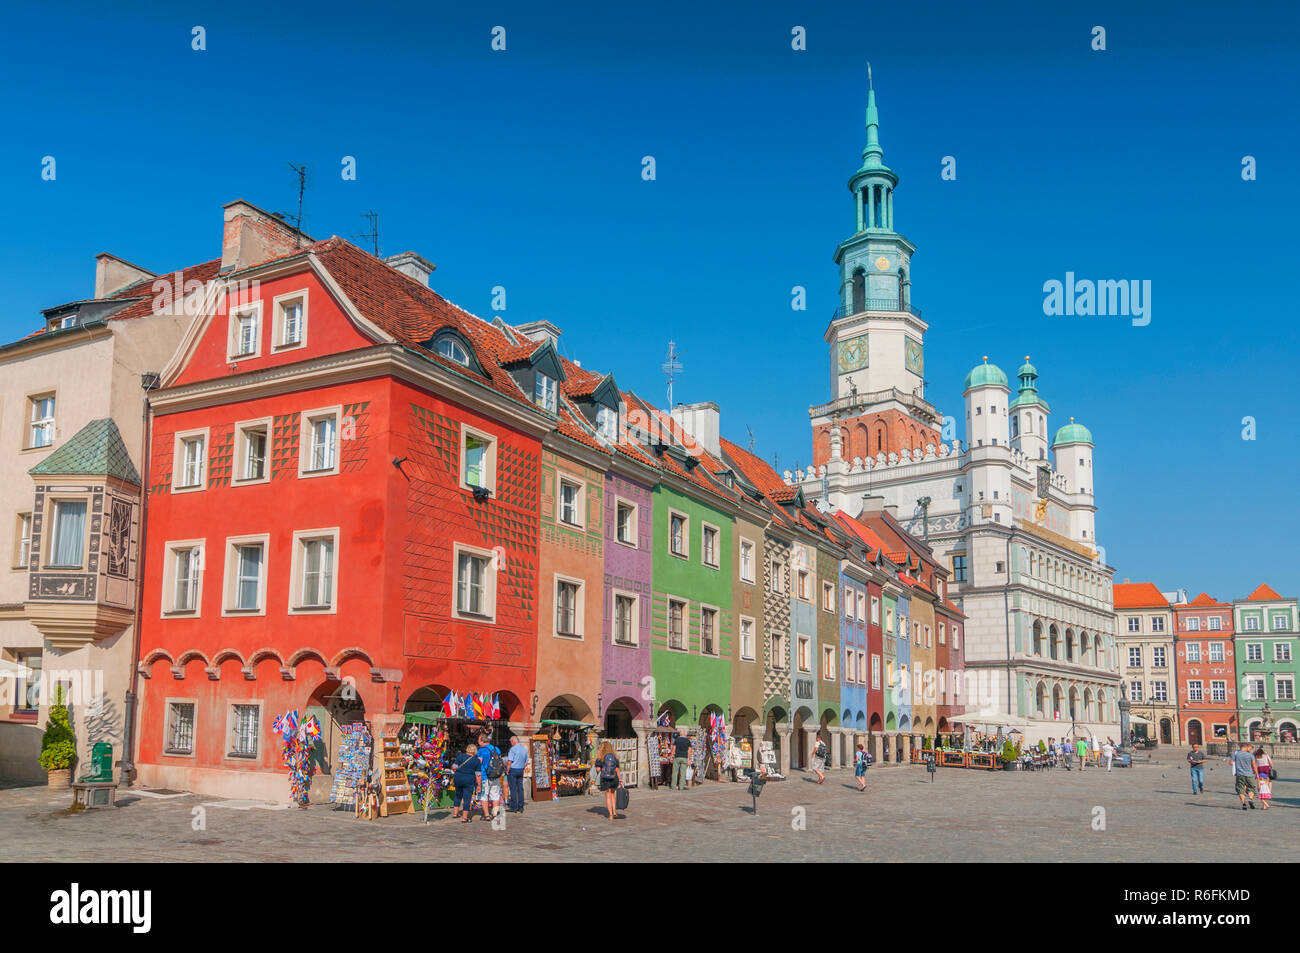 Old Market Square And Town Hall In Poznan, Poland Stock Photo